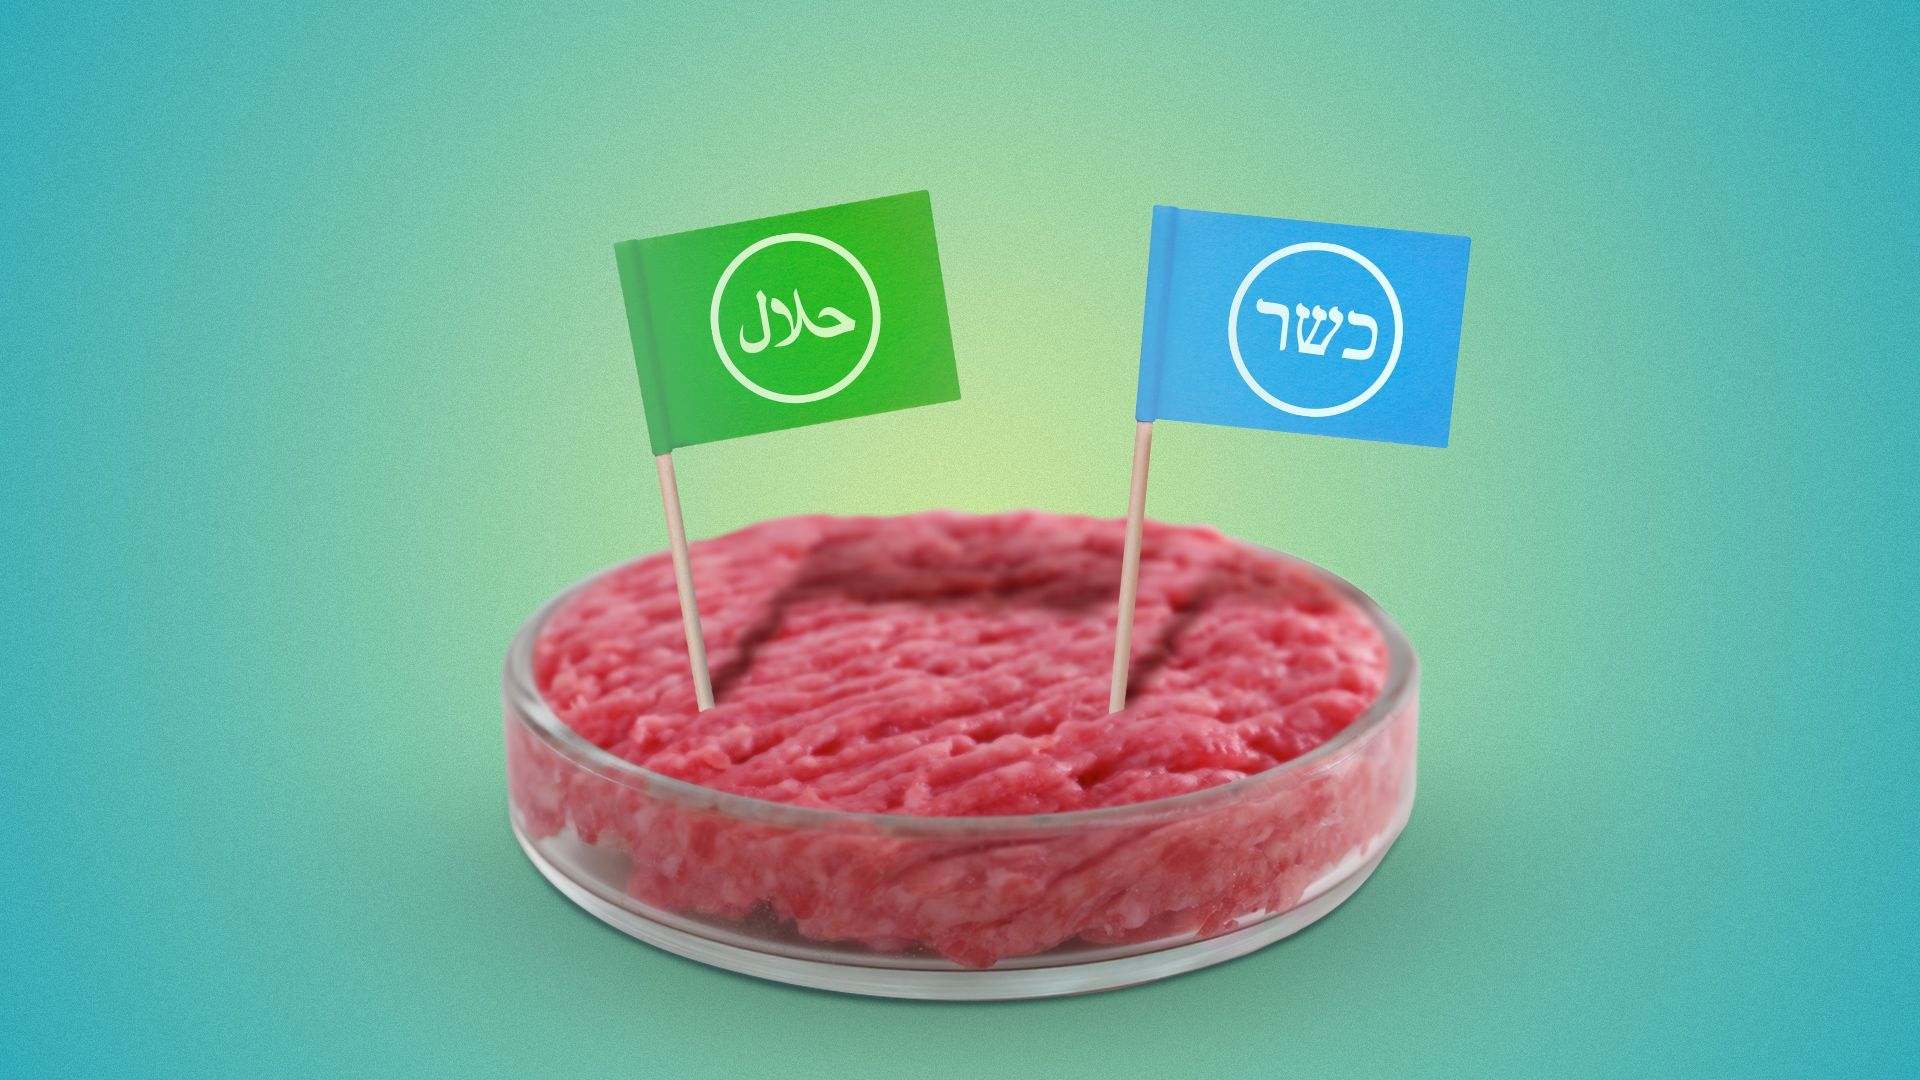 Illustration of a petri dish full of minced meat with a "halal" and "kosher" flag planted in the meat. 